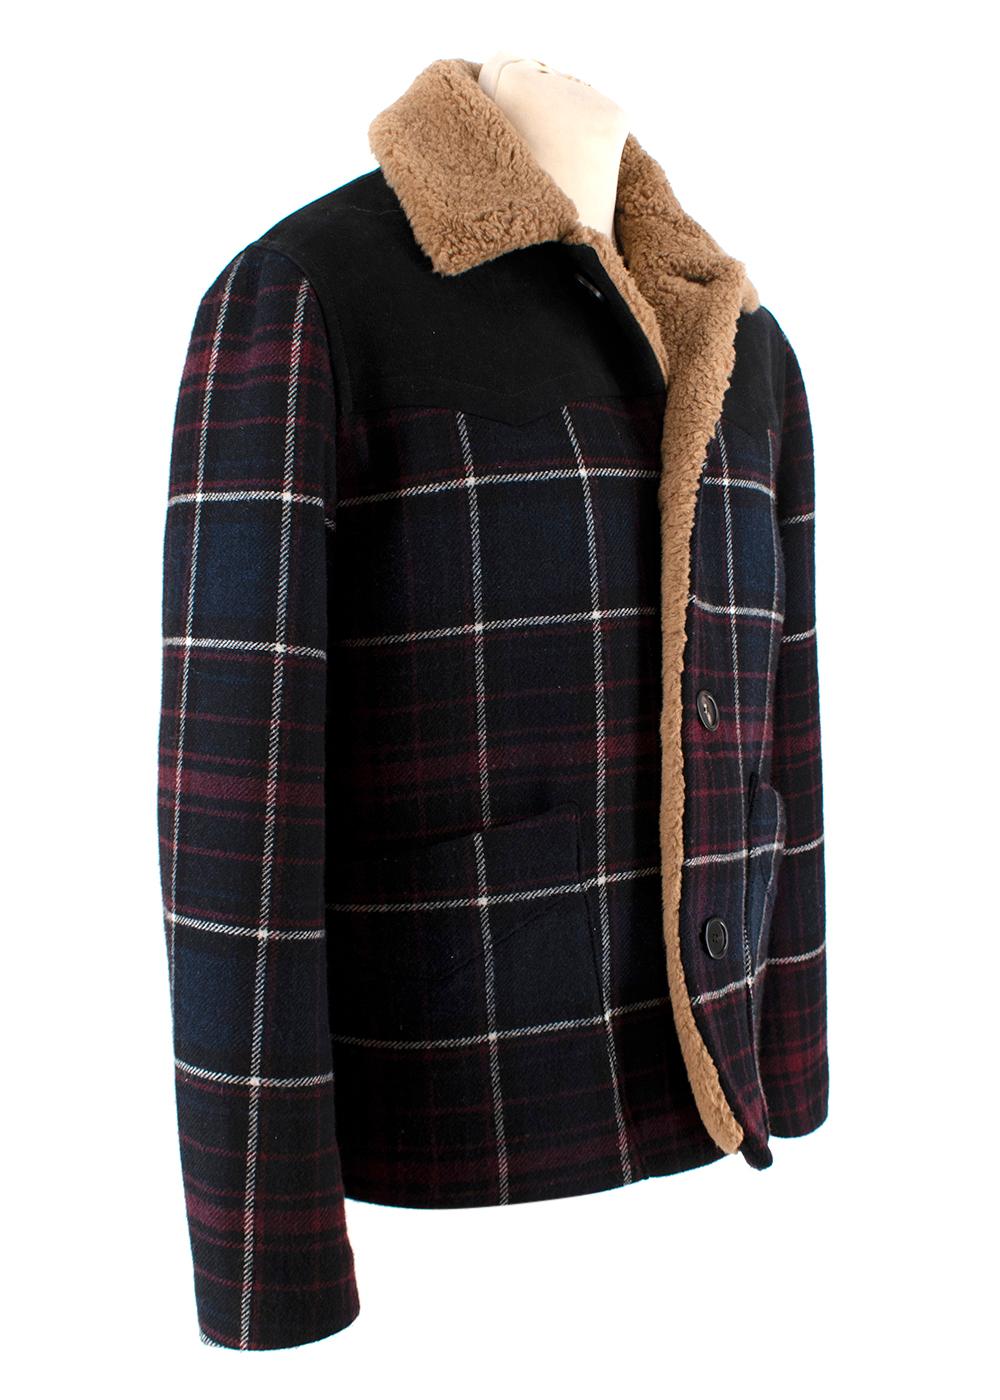 Marni Shearling Lined Check Wool Coat

- Lumberjack-style jacket with a windowpane woolen outer, and suede shoulder patches
- Lined in tan brown shearling
- Button front
- Interior slip pocket

Materials 
outer 
89% Wool
11% Polyamide 
Secondary